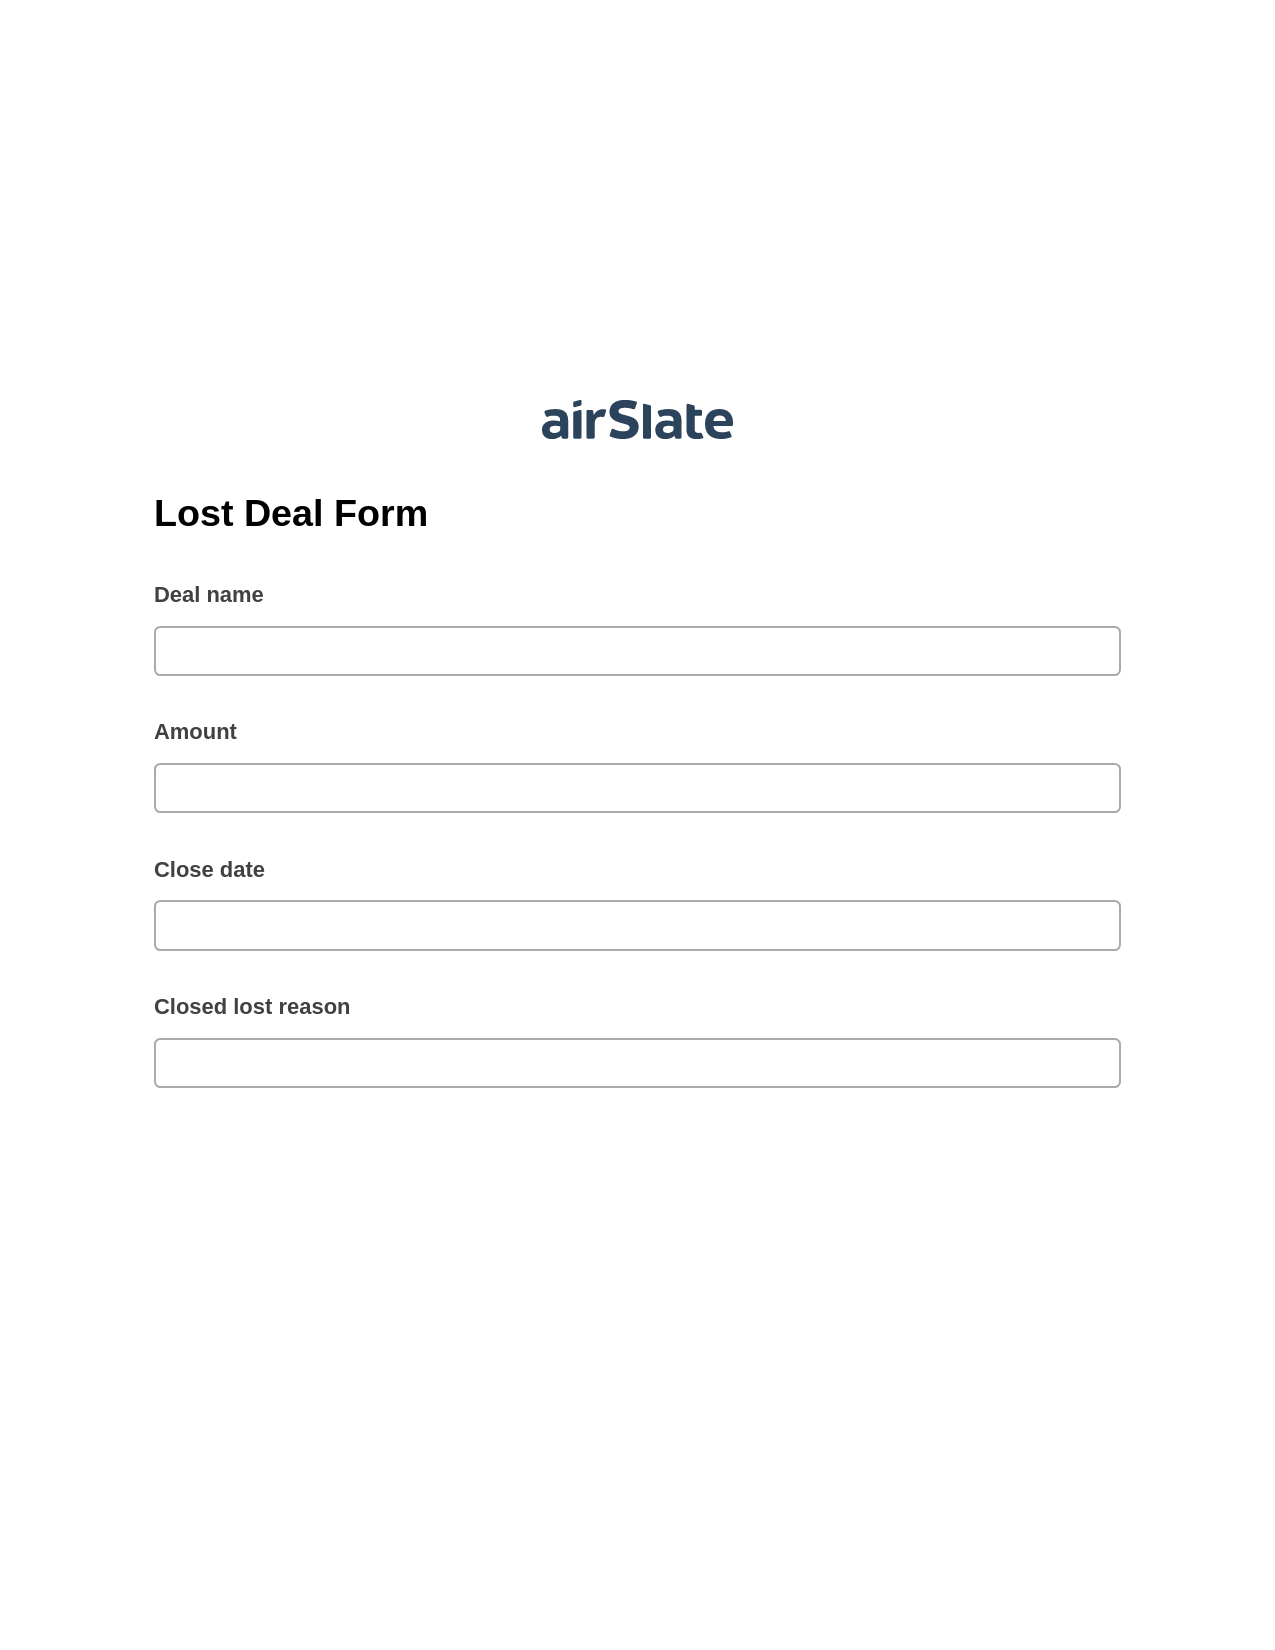 Lost Deal Form Pre-fill Document Bot, Webhook Bot, Export to Salesforce Record Bot